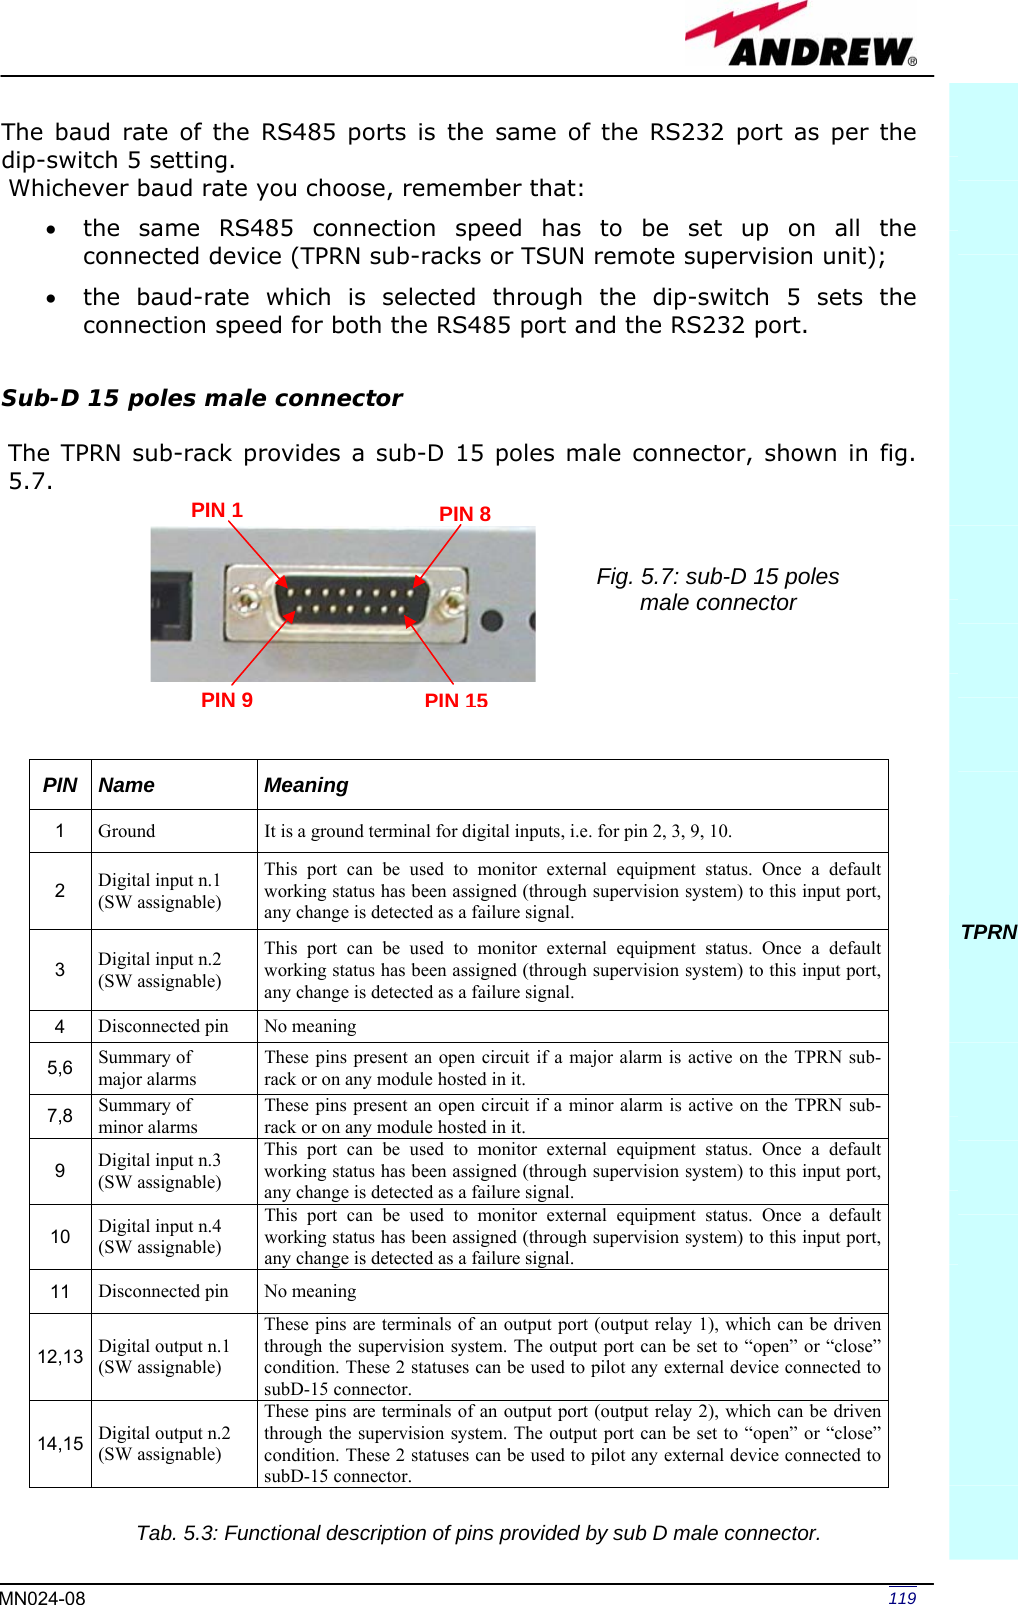   119MN024-08 The baud rate of the RS485 ports is the same of the RS232 port as per the dip-switch 5 setting. Whichever baud rate you choose, remember that: • the same RS485 connection speed has to be set up on all the connected device (TPRN sub-racks or TSUN remote supervision unit); • the baud-rate which is selected through the dip-switch 5 sets the connection speed for both the RS485 port and the RS232 port.  Sub-D 15 poles male connector  The TPRN sub-rack provides a sub-D 15 poles male connector, shown in fig. 5.7.        PIN Name  Meaning 1  Ground  It is a ground terminal for digital inputs, i.e. for pin 2, 3, 9, 10. 2  Digital input n.1  (SW assignable) This port can be used to monitor external equipment status. Once a default working status has been assigned (through supervision system) to this input port, any change is detected as a failure signal. 3  Digital input n.2  (SW assignable) This port can be used to monitor external equipment status. Once a default working status has been assigned (through supervision system) to this input port, any change is detected as a failure signal. 4  Disconnected pin  No meaning 5,6  Summary of  major alarms These pins present an open circuit if a major alarm is active on the TPRN sub-rack or on any module hosted in it.  7,8  Summary of  minor alarms These pins present an open circuit if a minor alarm is active on the TPRN sub-rack or on any module hosted in it.  9  Digital input n.3  (SW assignable) This port can be used to monitor external equipment status. Once a default working status has been assigned (through supervision system) to this input port, any change is detected as a failure signal. 10  Digital input n.4  (SW assignable) This port can be used to monitor external equipment status. Once a default working status has been assigned (through supervision system) to this input port, any change is detected as a failure signal. 11  Disconnected pin  No meaning 12,13  Digital output n.1  (SW assignable) These pins are terminals of an output port (output relay 1), which can be driven through the supervision system. The output port can be set to “open” or “close” condition. These 2 statuses can be used to pilot any external device connected to subD-15 connector. 14,15  Digital output n.2 (SW assignable) These pins are terminals of an output port (output relay 2), which can be driven through the supervision system. The output port can be set to “open” or “close” condition. These 2 statuses can be used to pilot any external device connected to subD-15 connector.             TPRN        PIN 1  PIN 8PIN 9PIN 15Fig. 5.7: sub-D 15 poles  male connector Tab. 5.3: Functional description of pins provided by sub D male connector. 